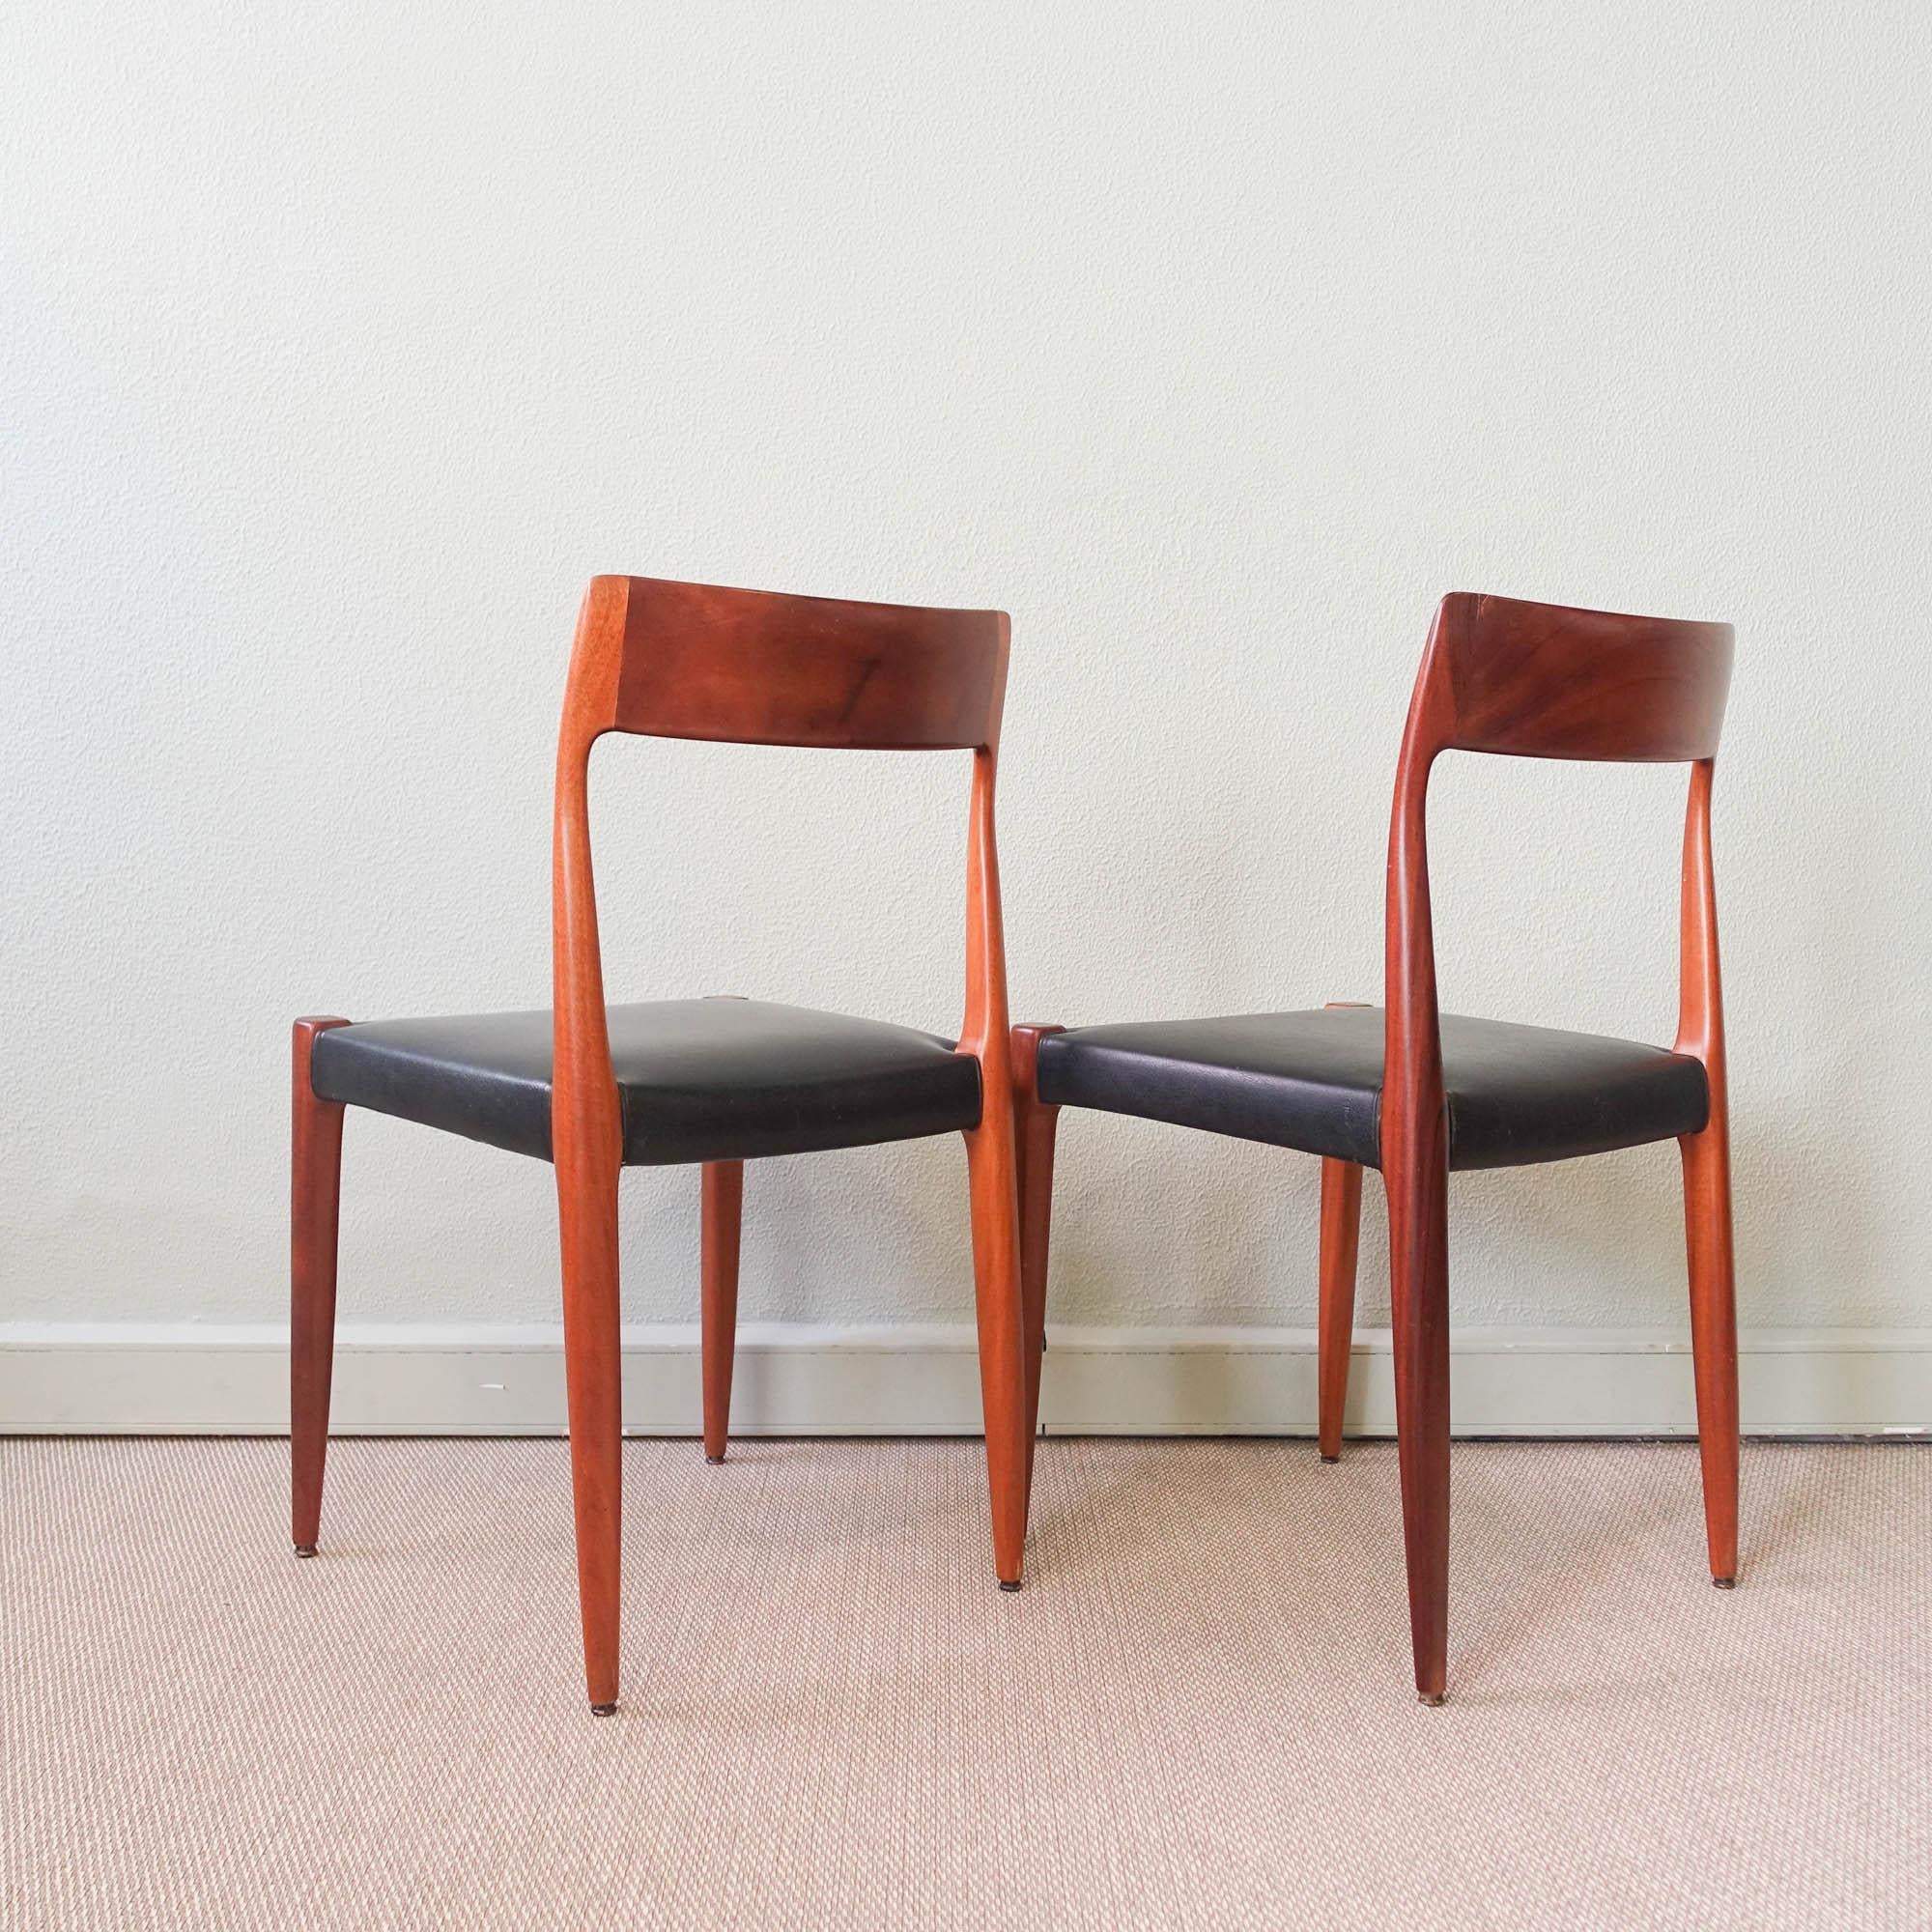 Faux Leather Set of 4 Olaio Chairs Model Caravela by José Espinho, 1965